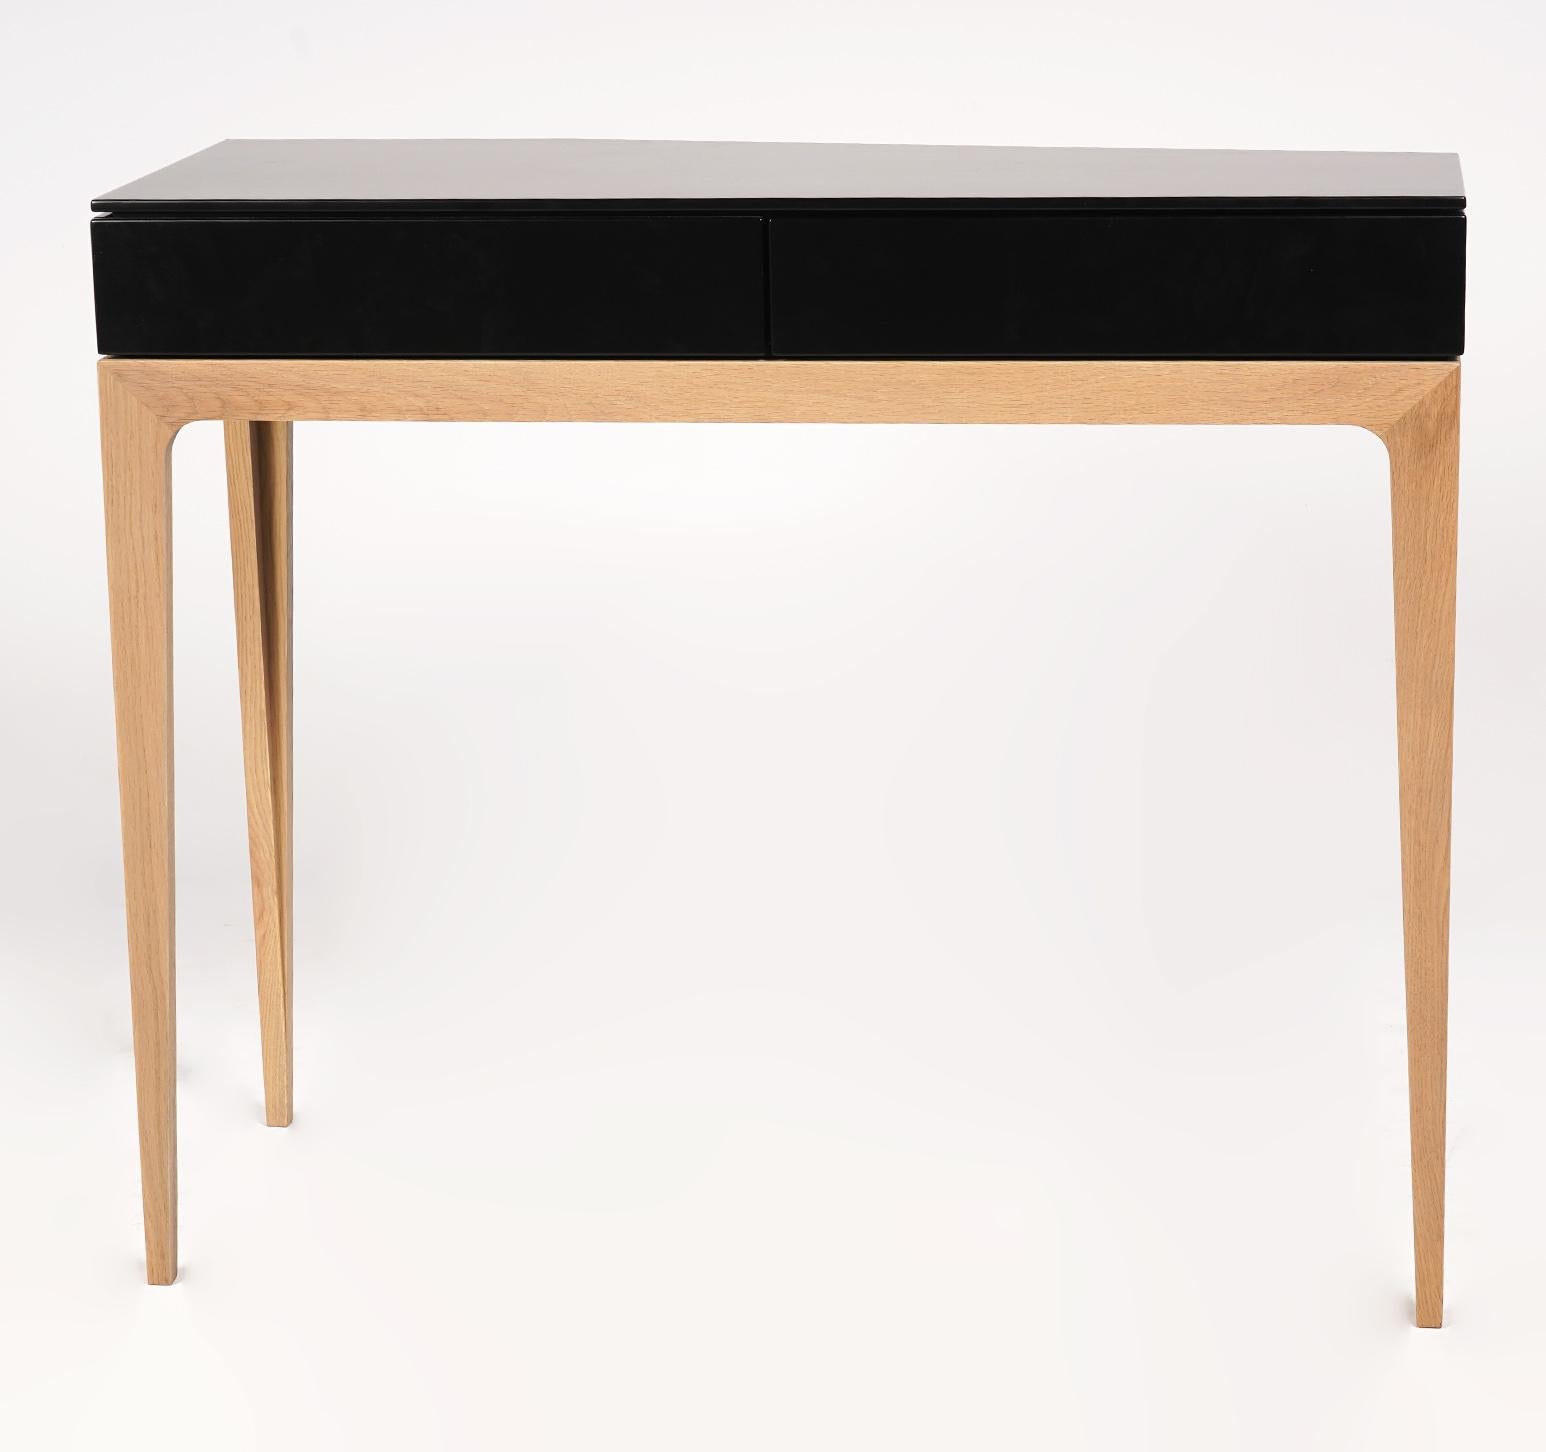 'Moved' console table by Sandra Dumuth for Roche Bobois. Offset design with three legs. Asymetrical three-legged console, top with 2 drawers. Description from Roche Bobois website: Freely designed by young designer Sandra Demuth, the pieces of the